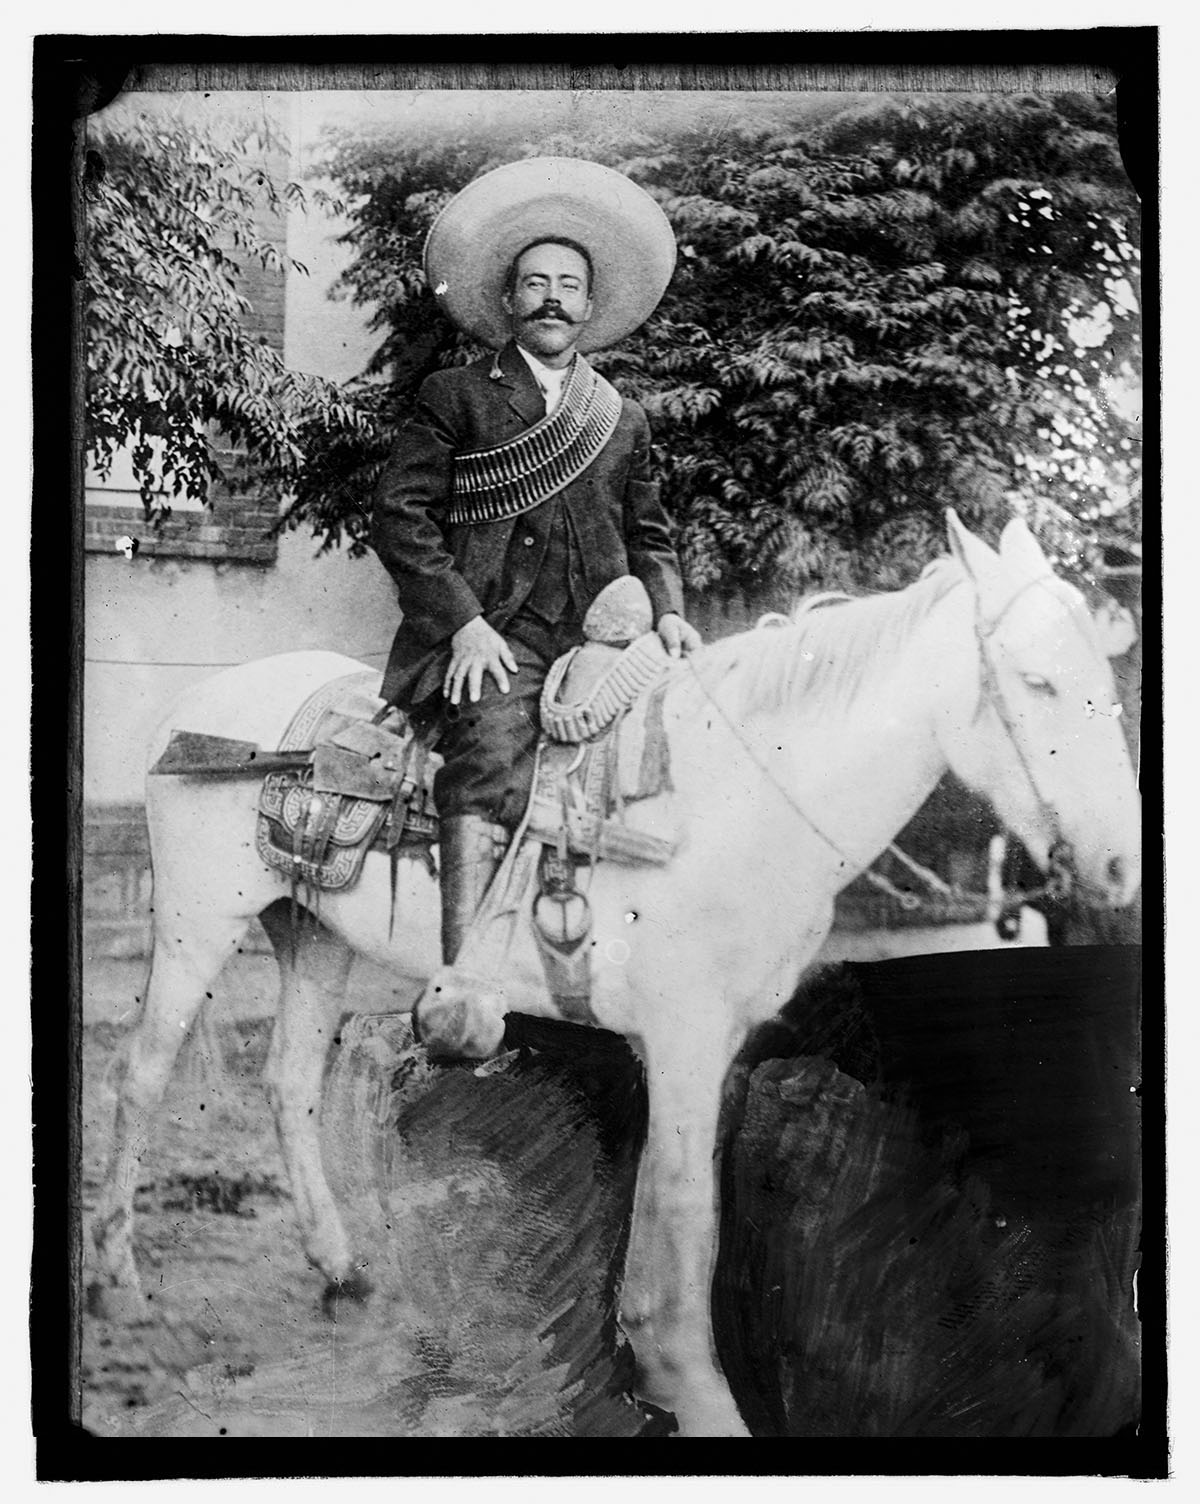 A black and white photograph of a man on a white horse